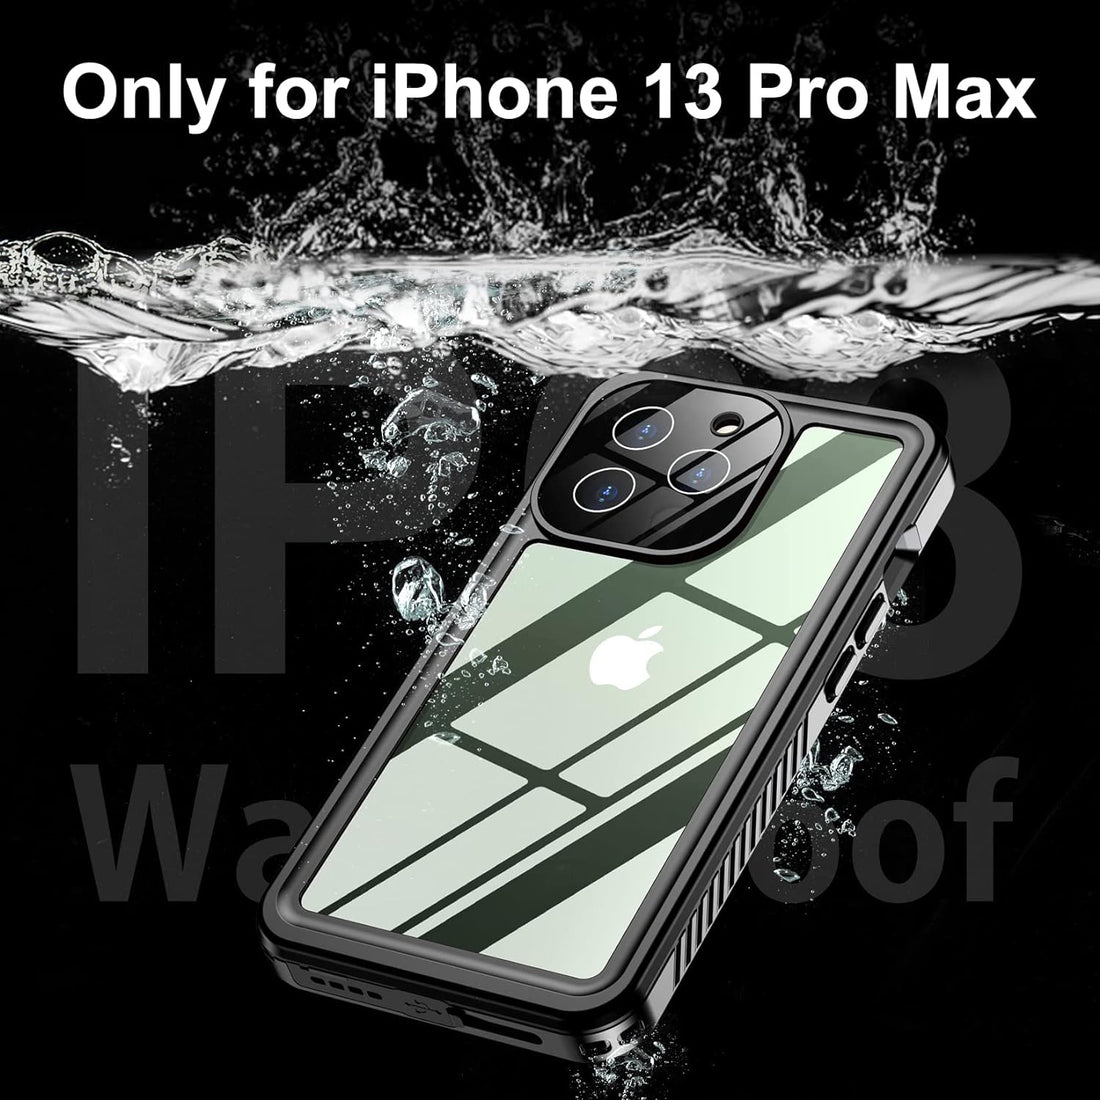 Temdan [Real 360 for iPhone 13 Pro Max Case Waterproof, Built-in 9H Tempered Glass Camera Lens & Screen Protection [13FTMilitary Dropproof][Full-Body Shockproof][Dustproof] Phone Case Black